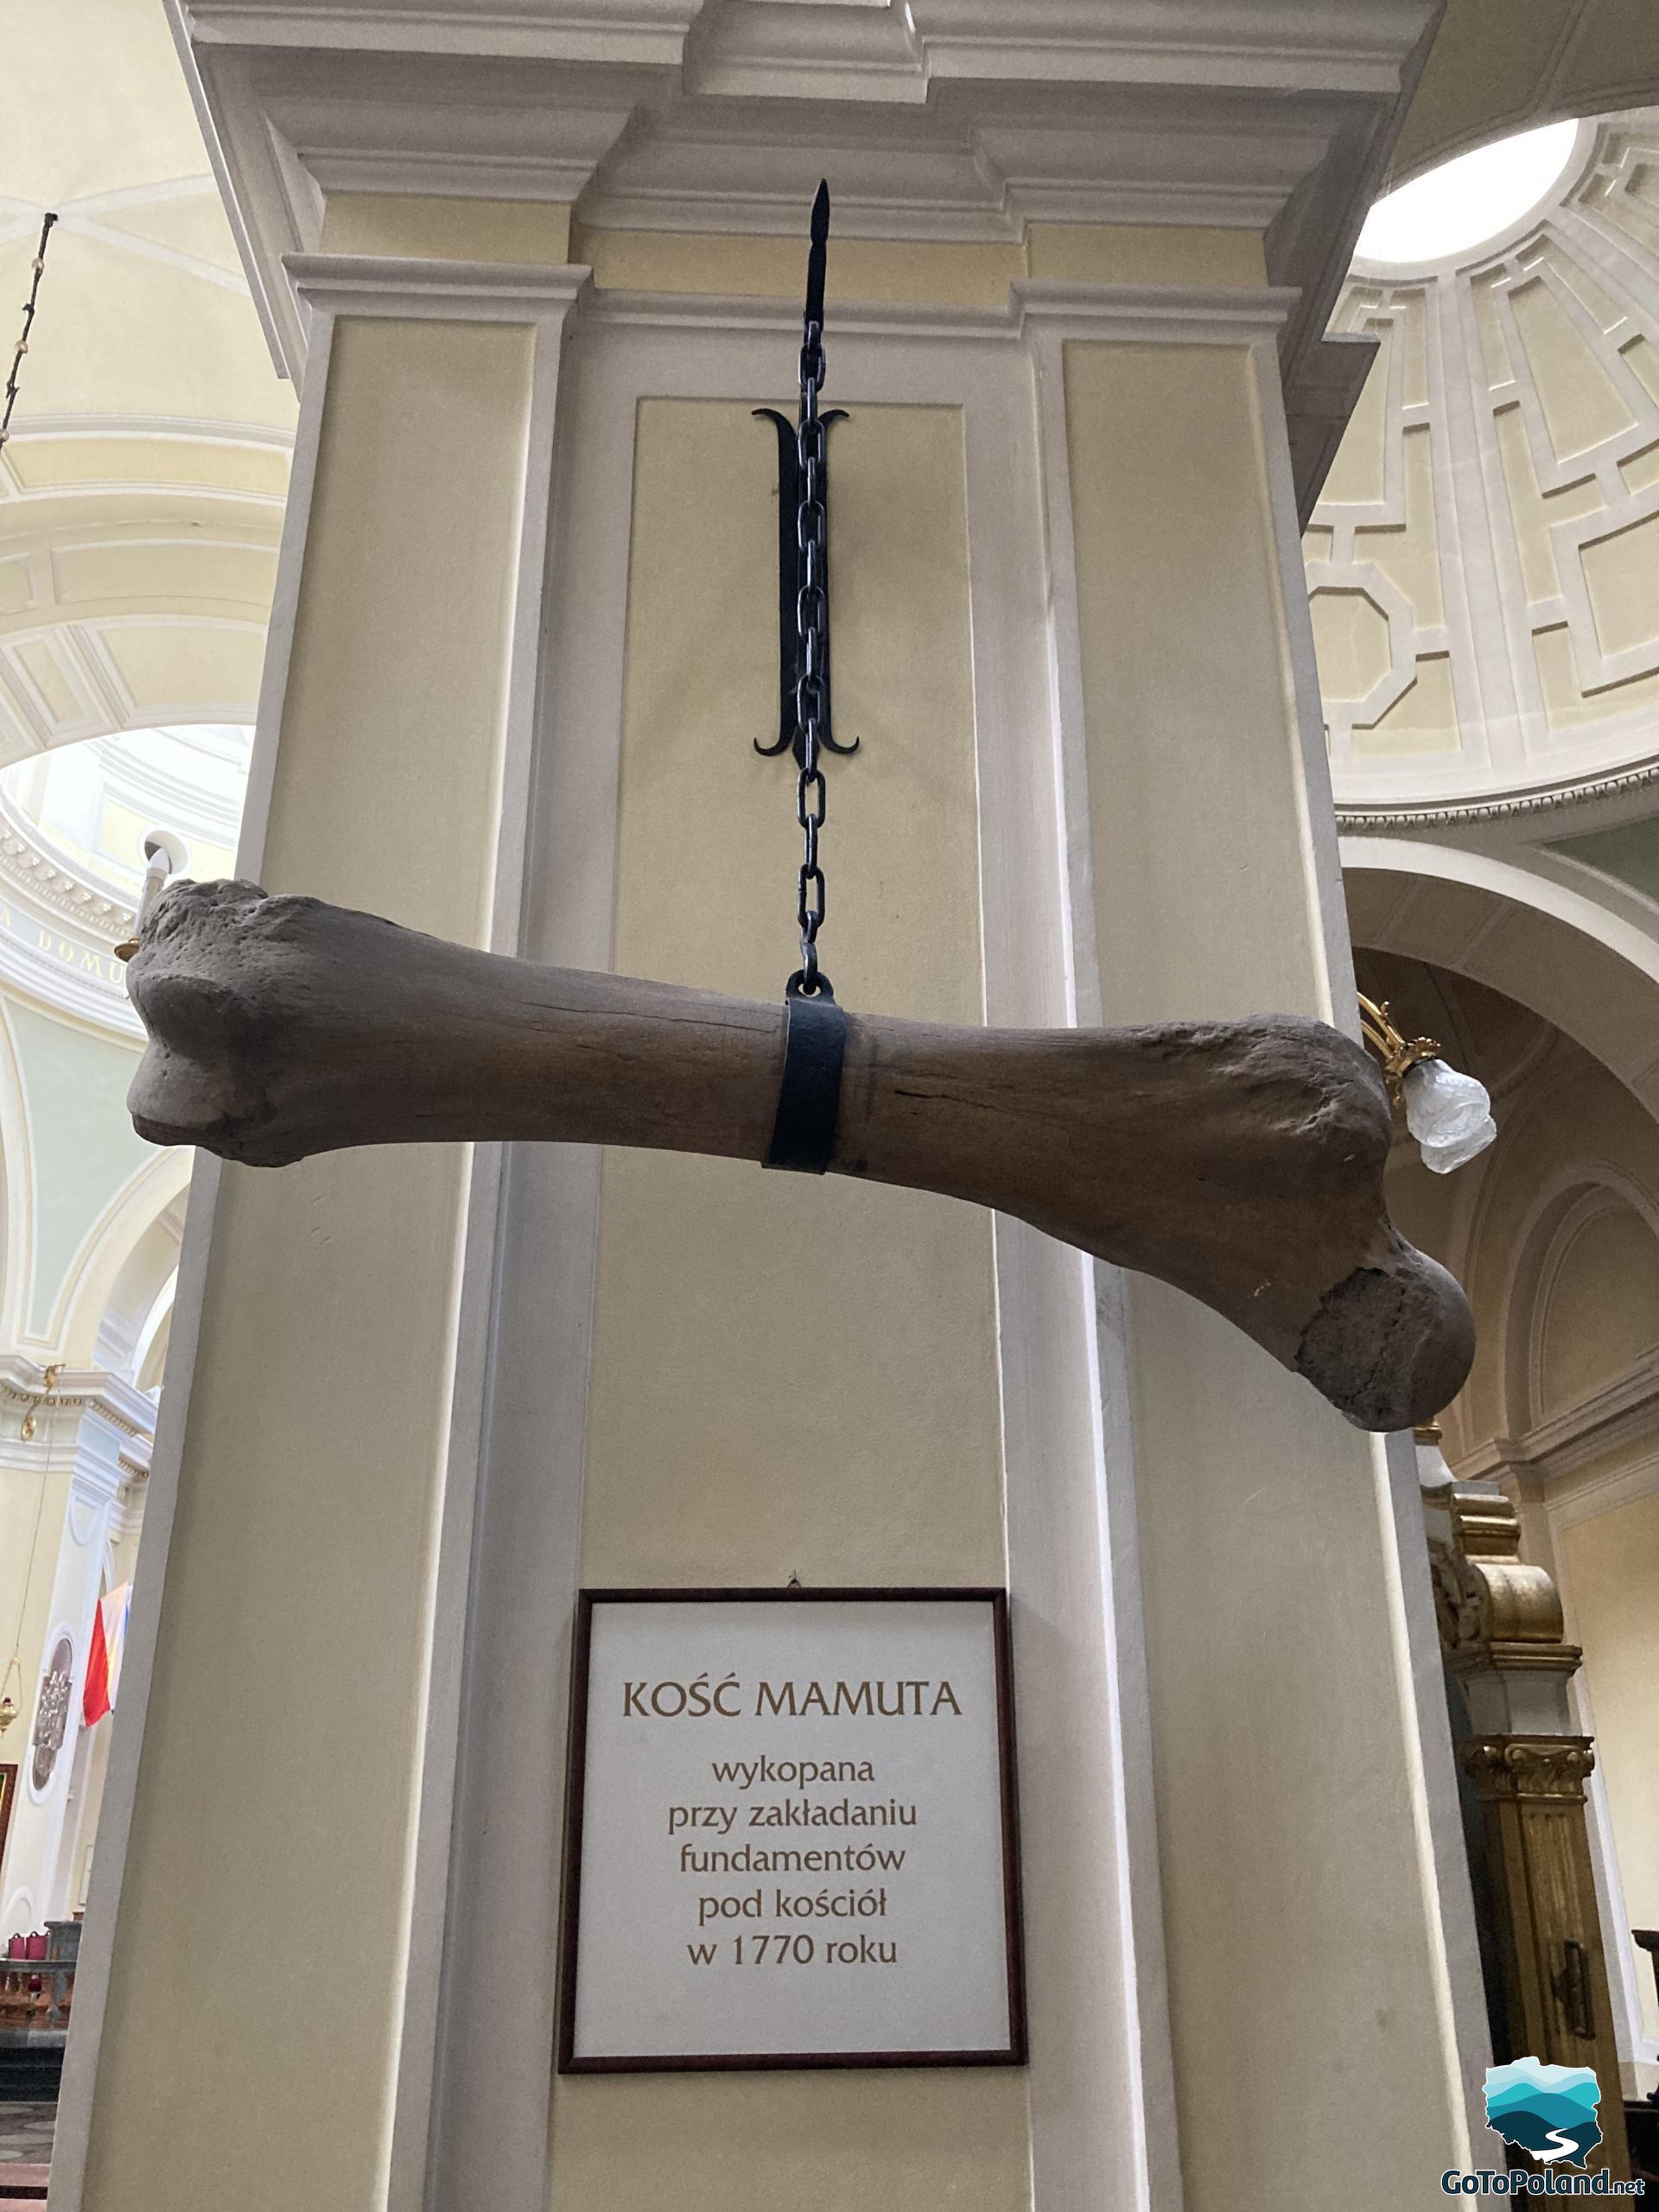 huge, mammoth bone found in 1770 while digging the foundations for the church, the bone hangs in the church